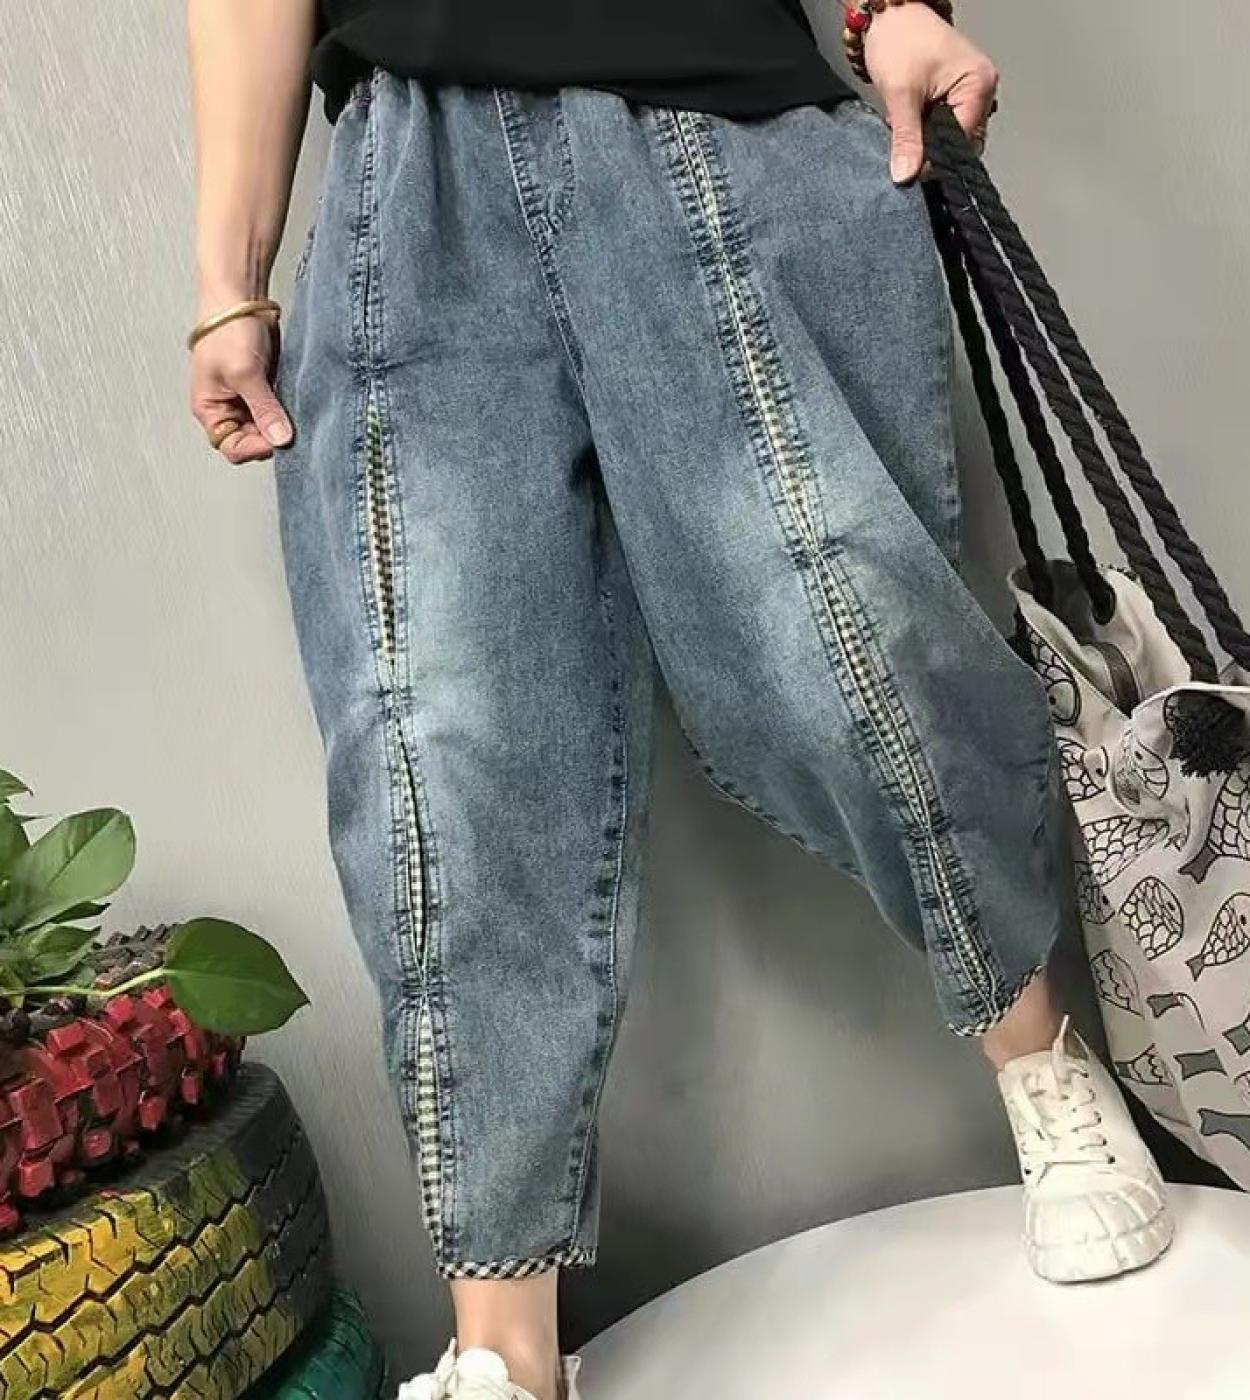  New Arrival Spring Women Loose Casual Elastic Waist Harem Pants All Matched Cotton Denim Patchwork Ankle Length Jeans W